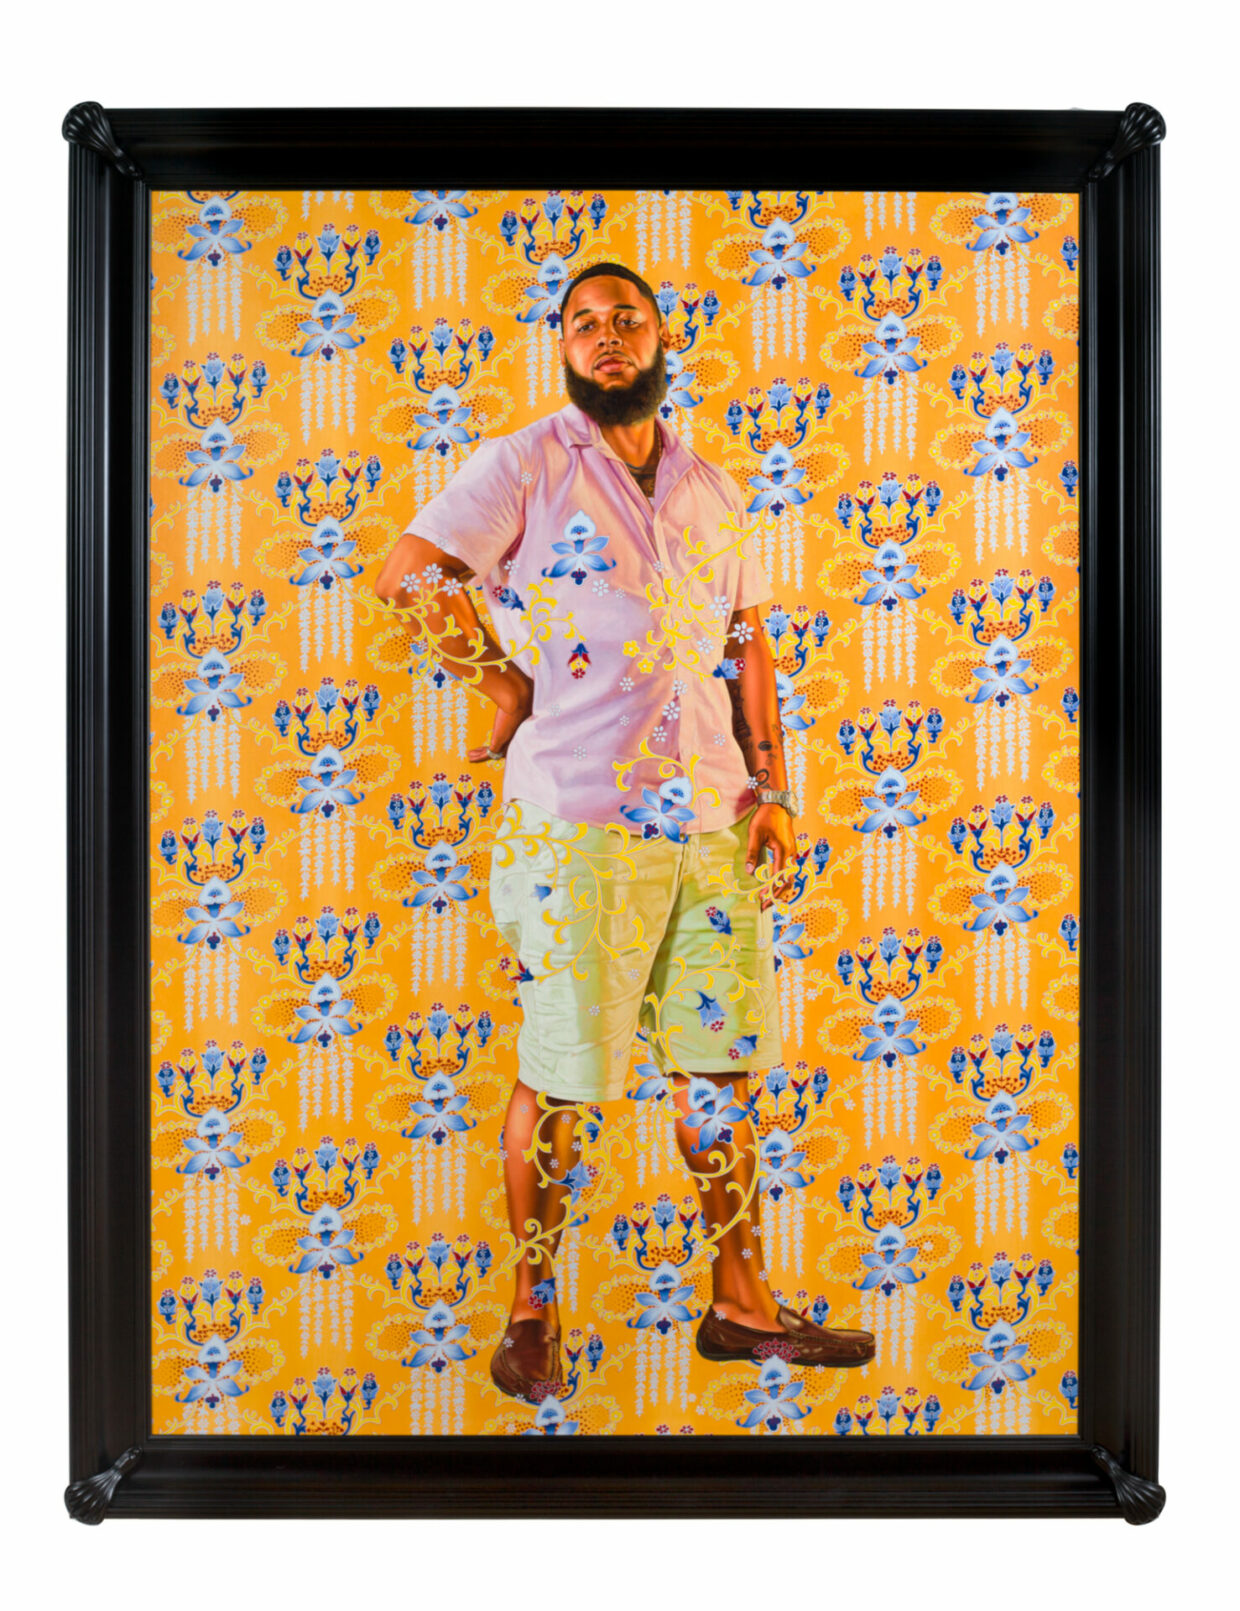 Kehinde Wiley: ‘When I first started painting black women, it was a return home’ | 12